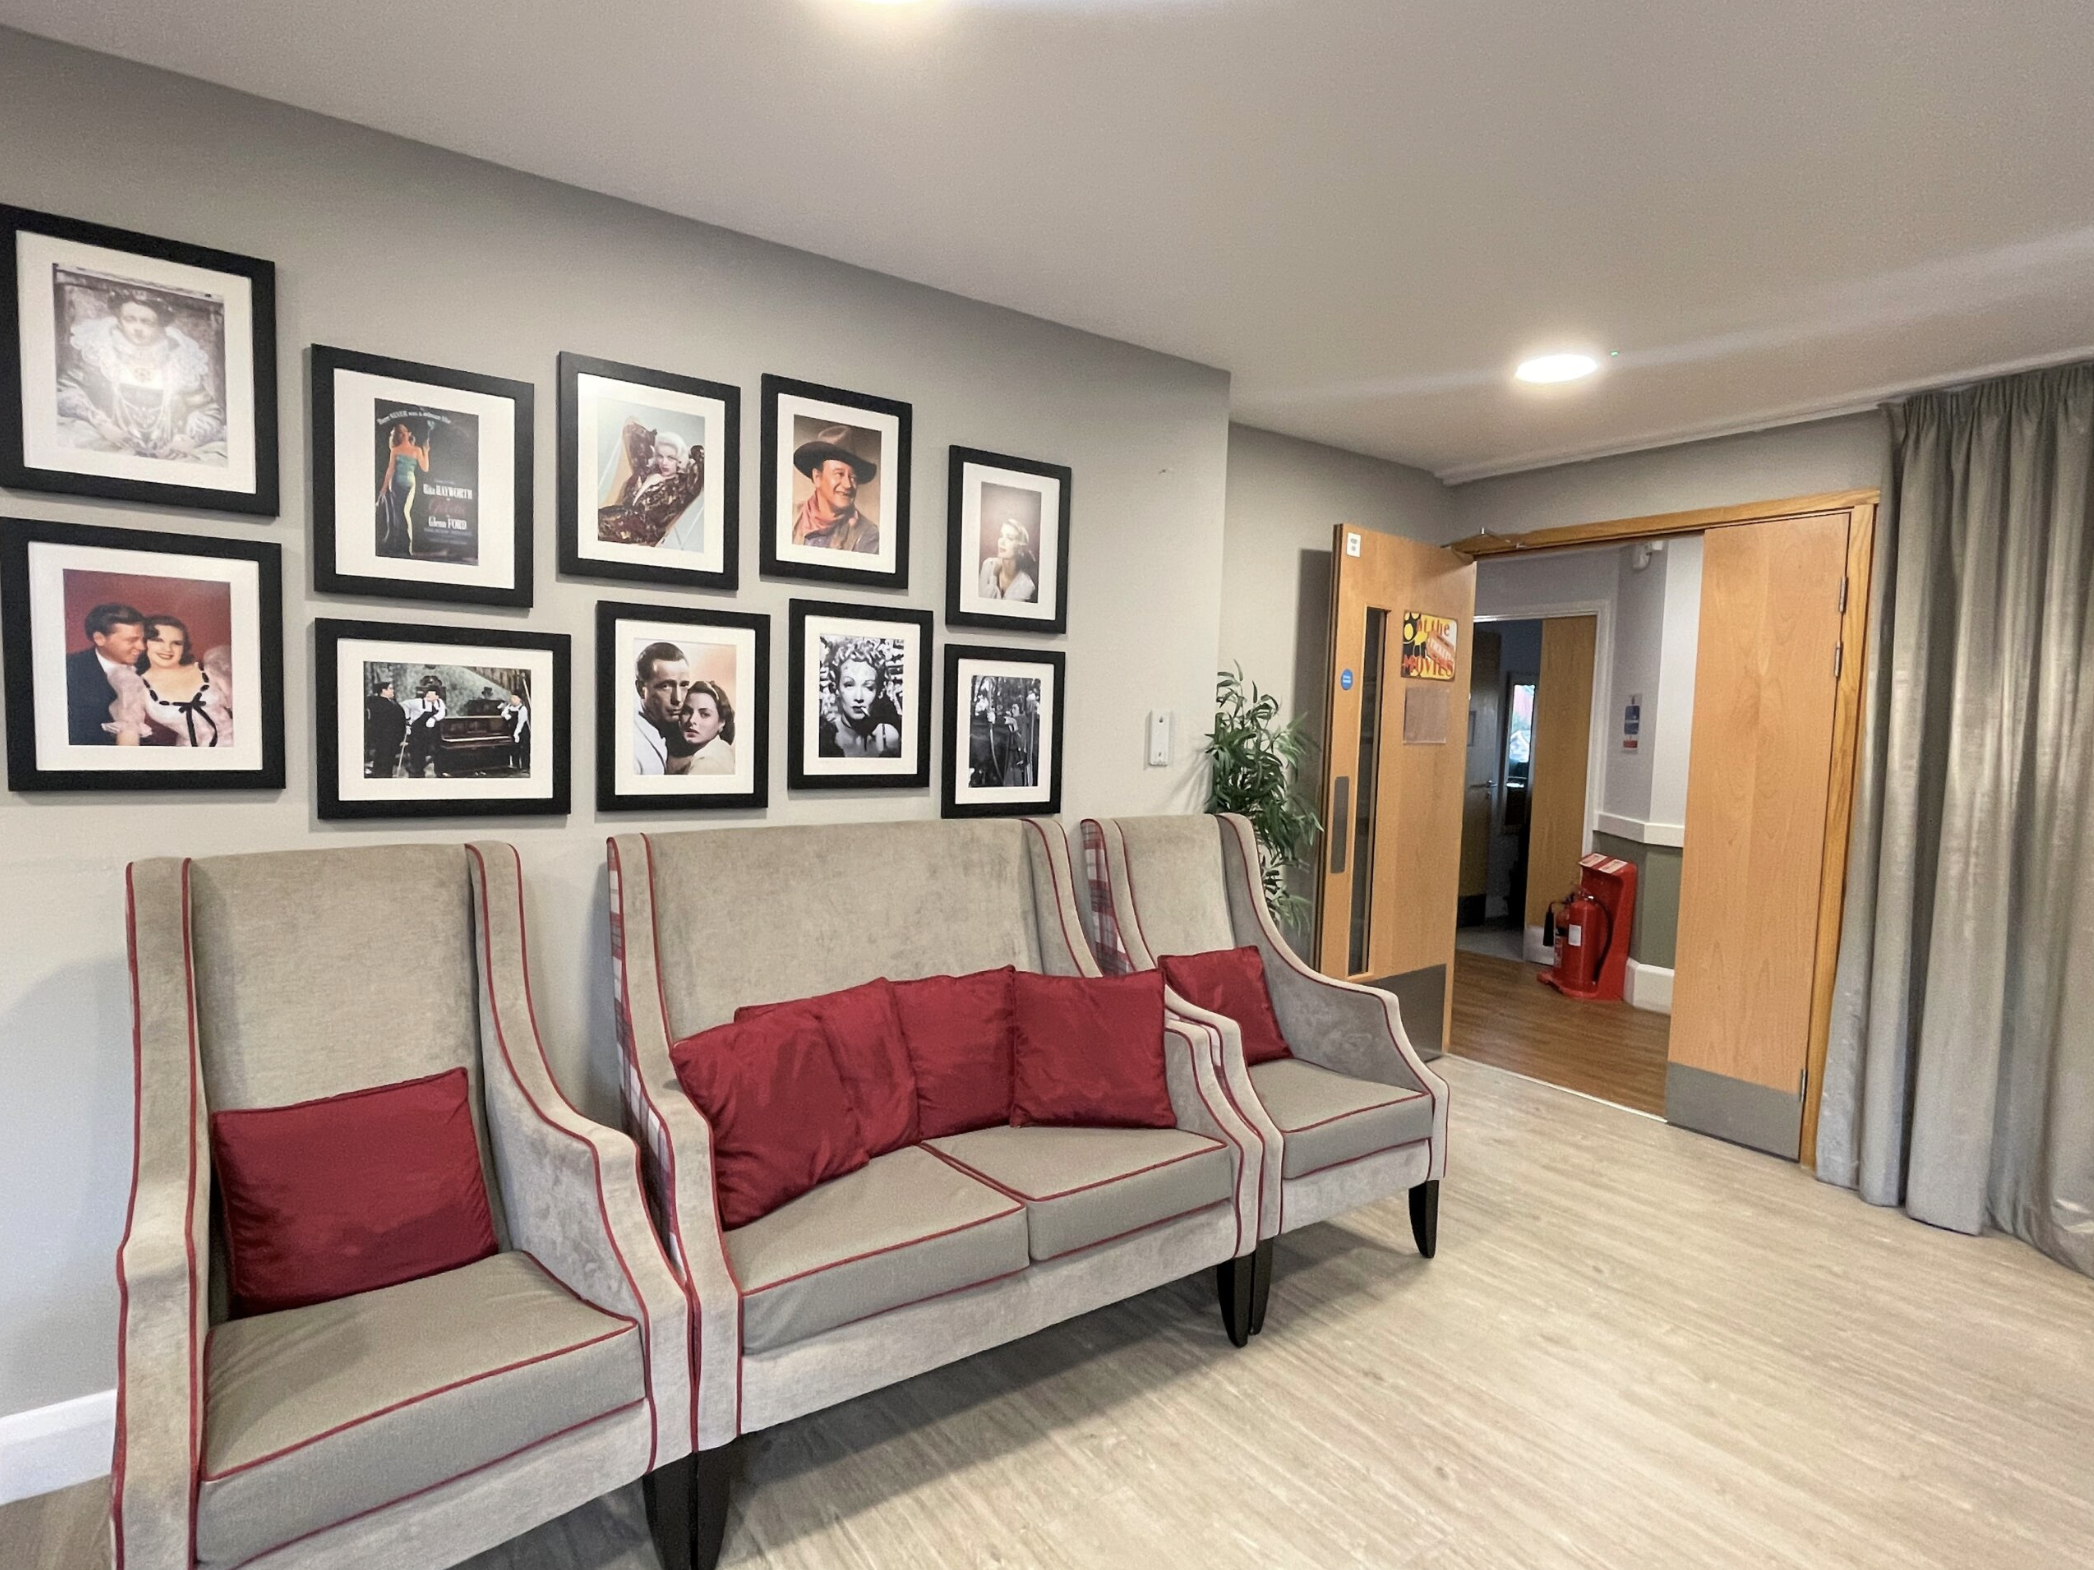 Cinema of Westgate House care home in Ware, Hertfordshire